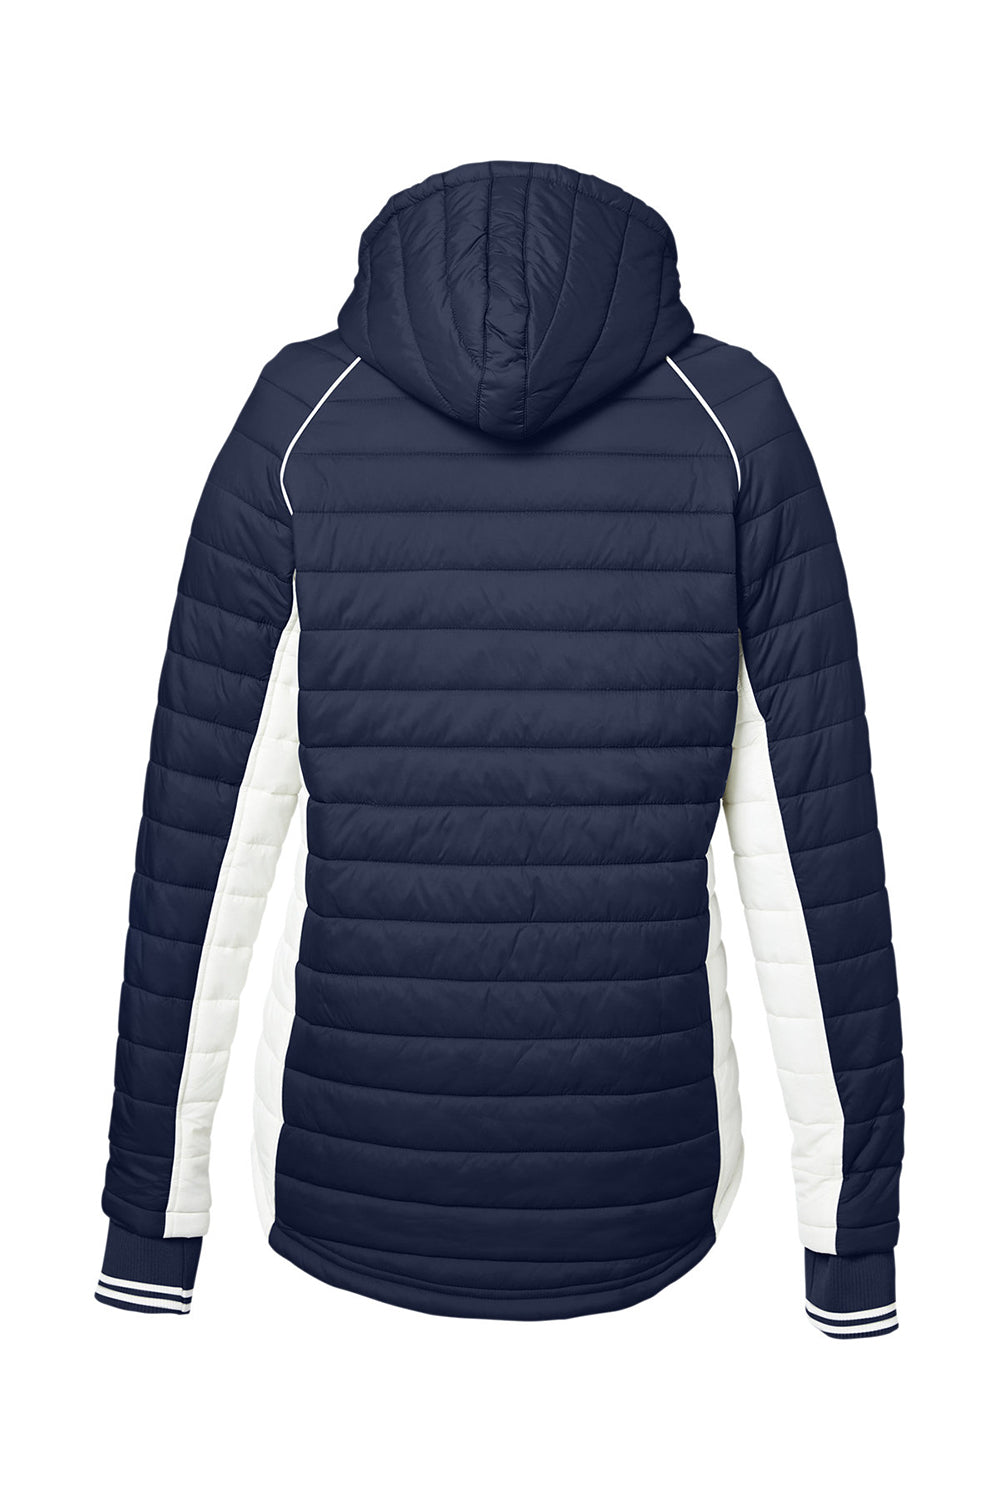 Nautica N17187 Womens Nautical Mile Packable Full Zip Hooded Puffer Jacket Night Navy Blue/Antique White Flat Back